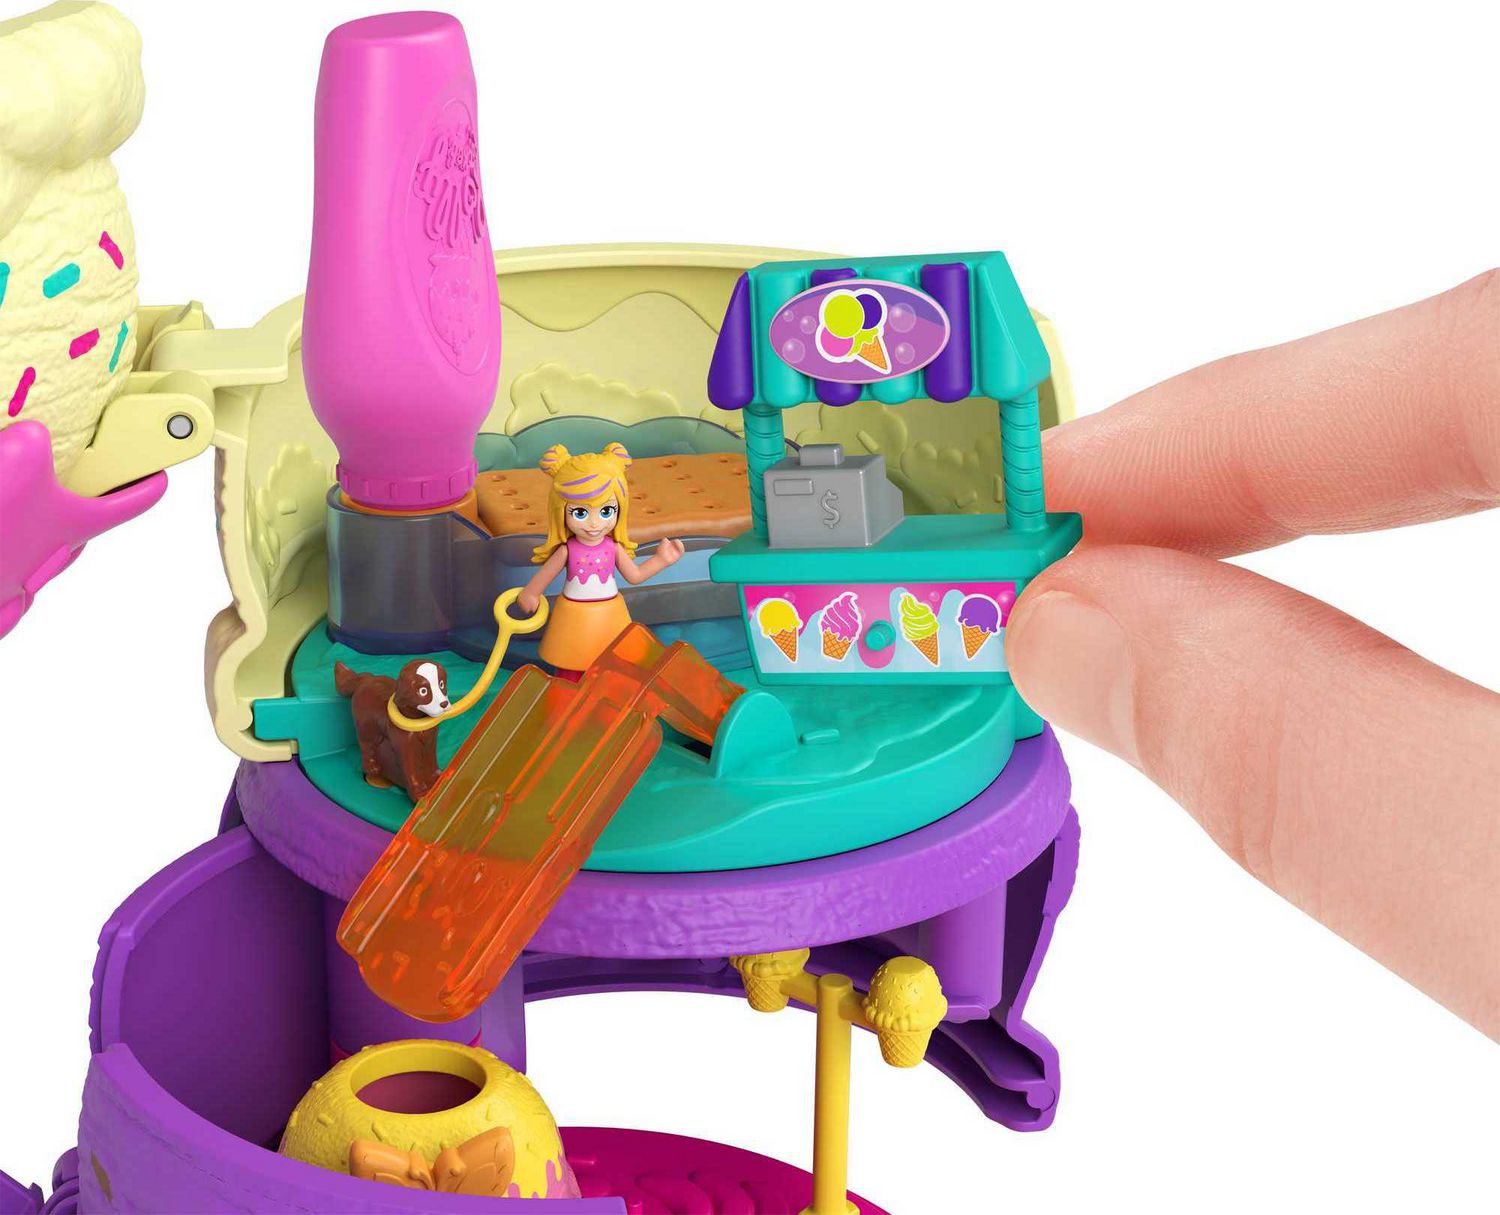 Polly Pocket Spin 'n Surprise Compact Playset, Ice Cream Cone